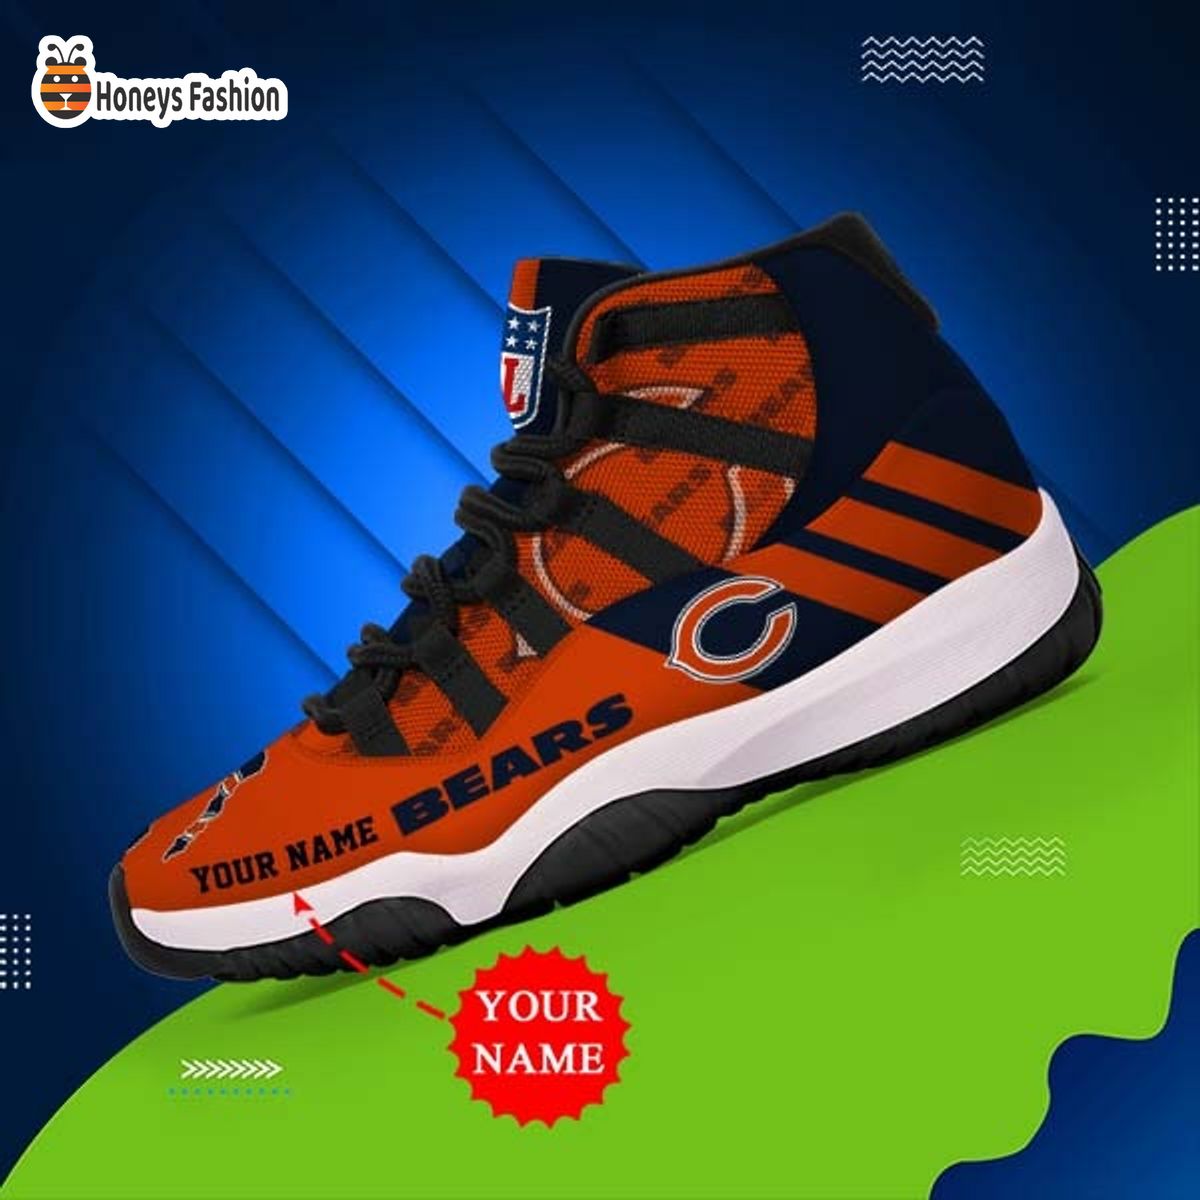 Chicago Bears NFL Adidas Personalized Air Jordan 11 Shoes